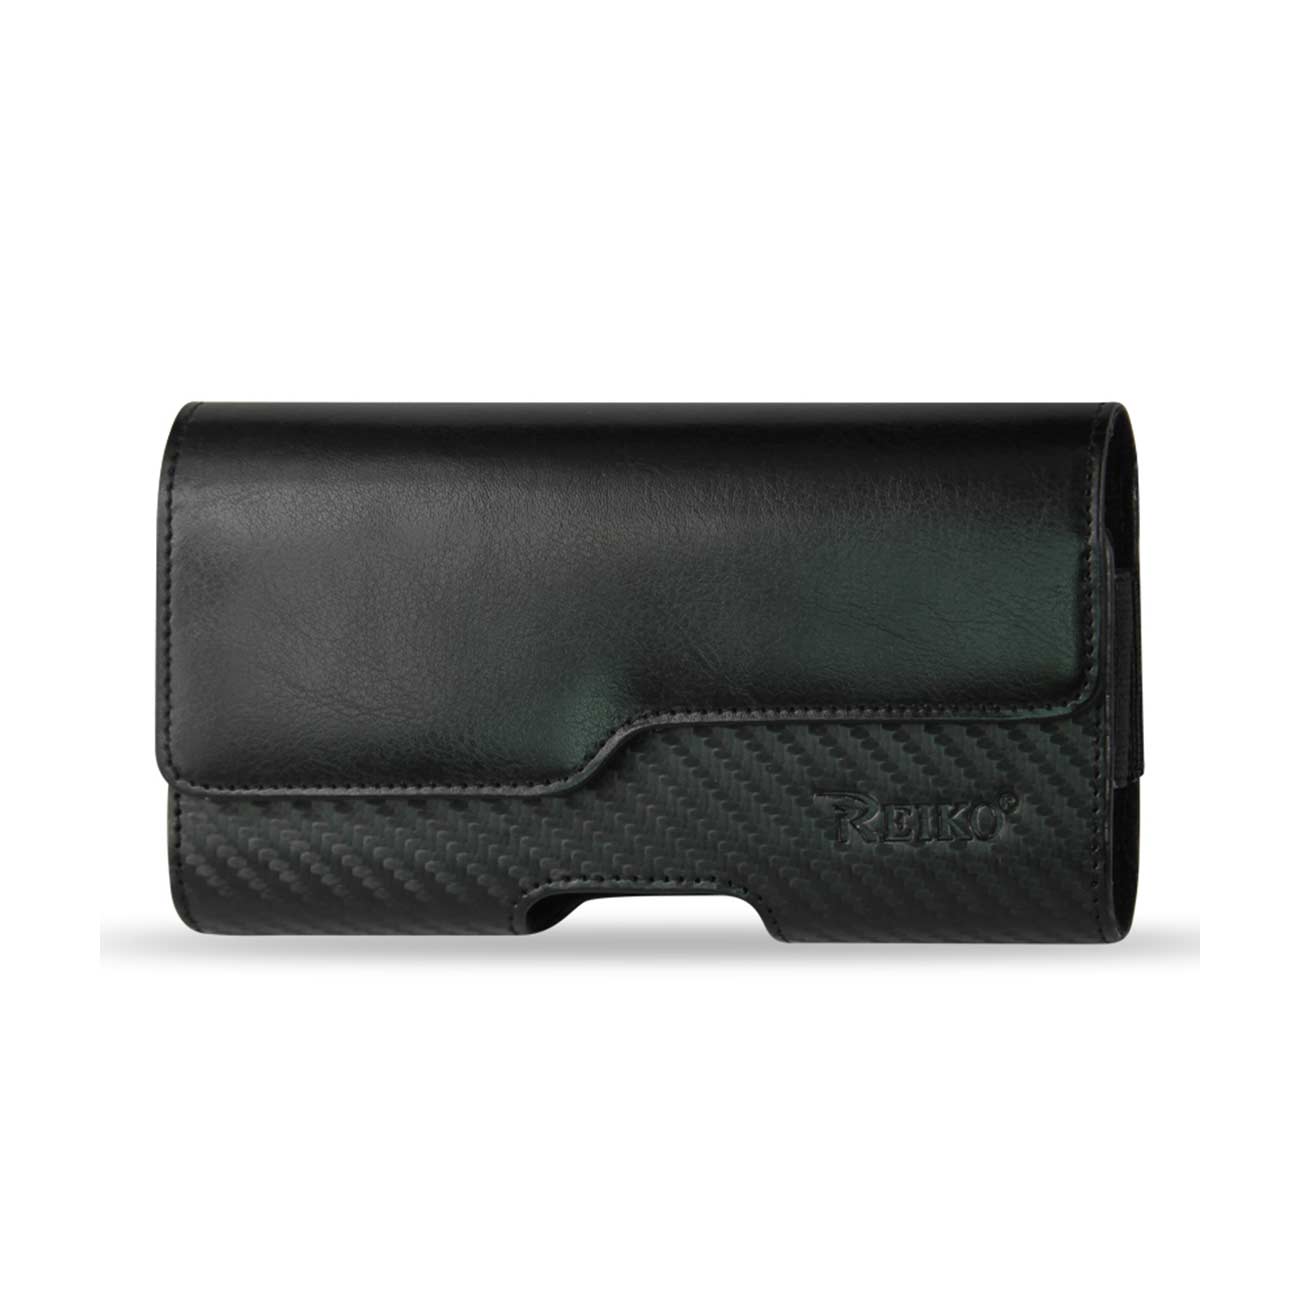 Pouch/ Phone Holster Leather Horizontal Z Lid Braided Pattern Black Color In Poly Bag Packaging